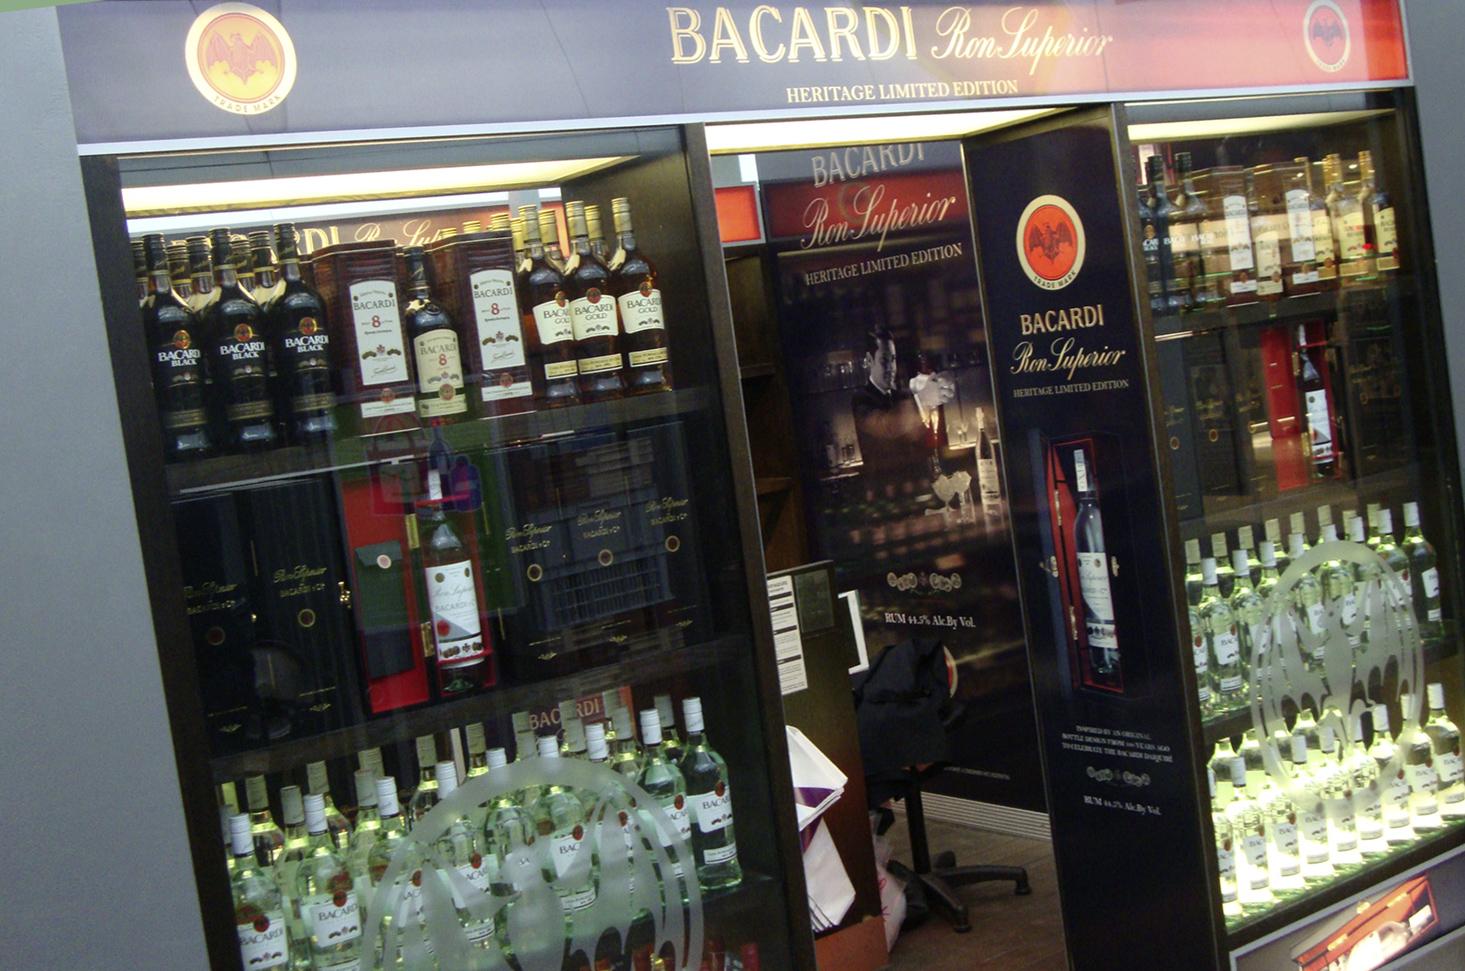 Store design and branding for Bacardi Ron Superior duty free travel retail